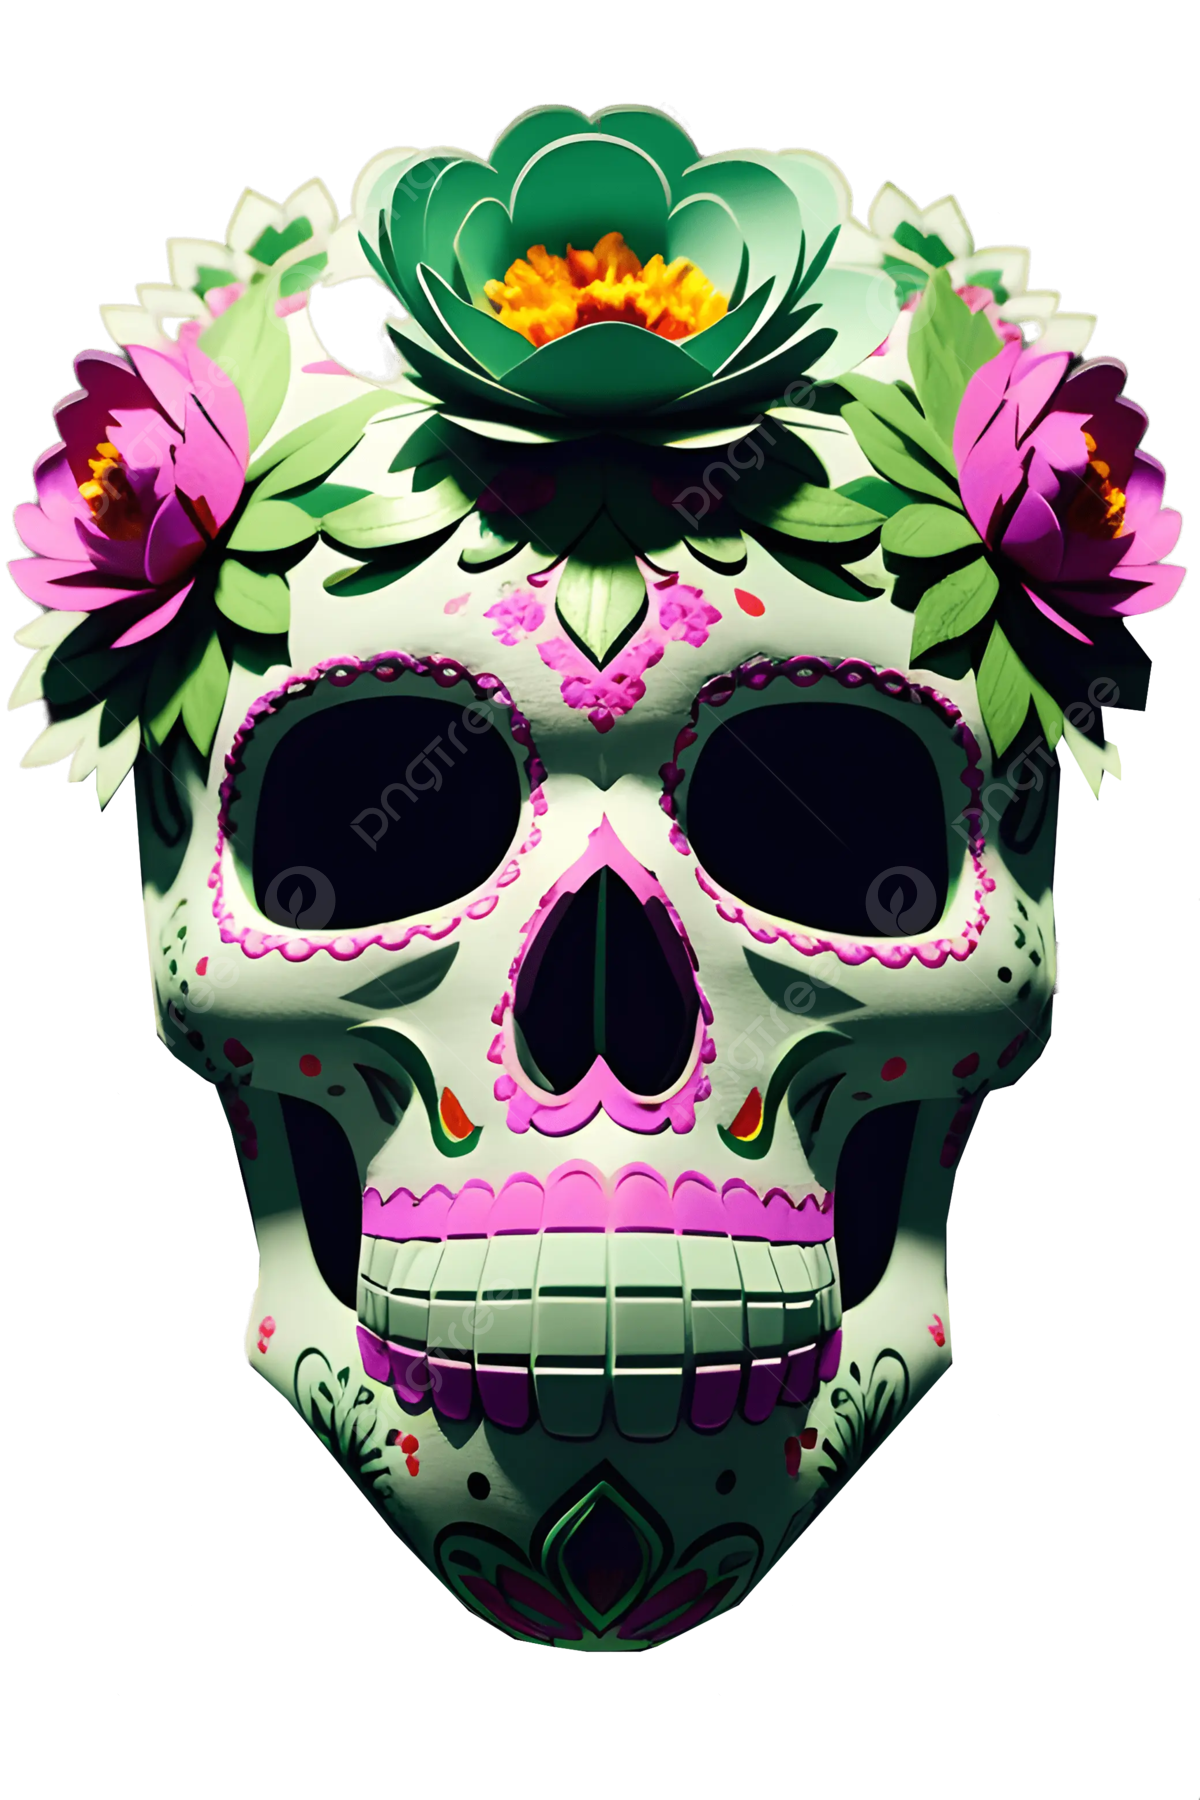 Day of the dead paper mache green peonies day of the dead day of the dead paper mache day of the dead green peonies png transparent clipart image and psd file for